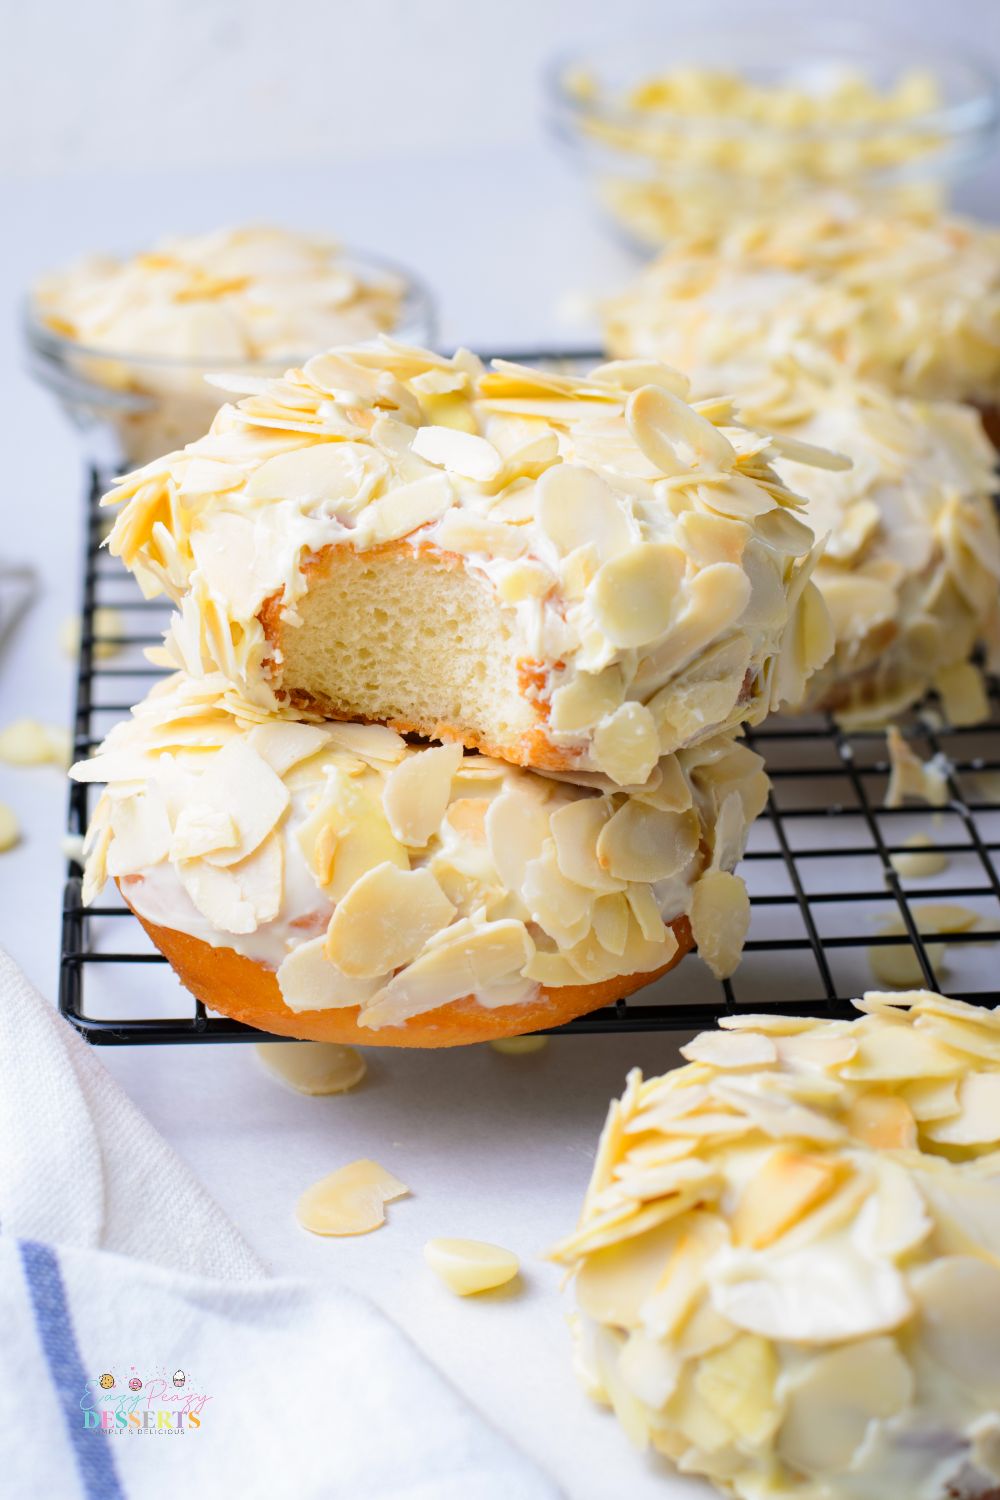 Image of two raised donuts covered in white chocolate glaze and shaved almonds